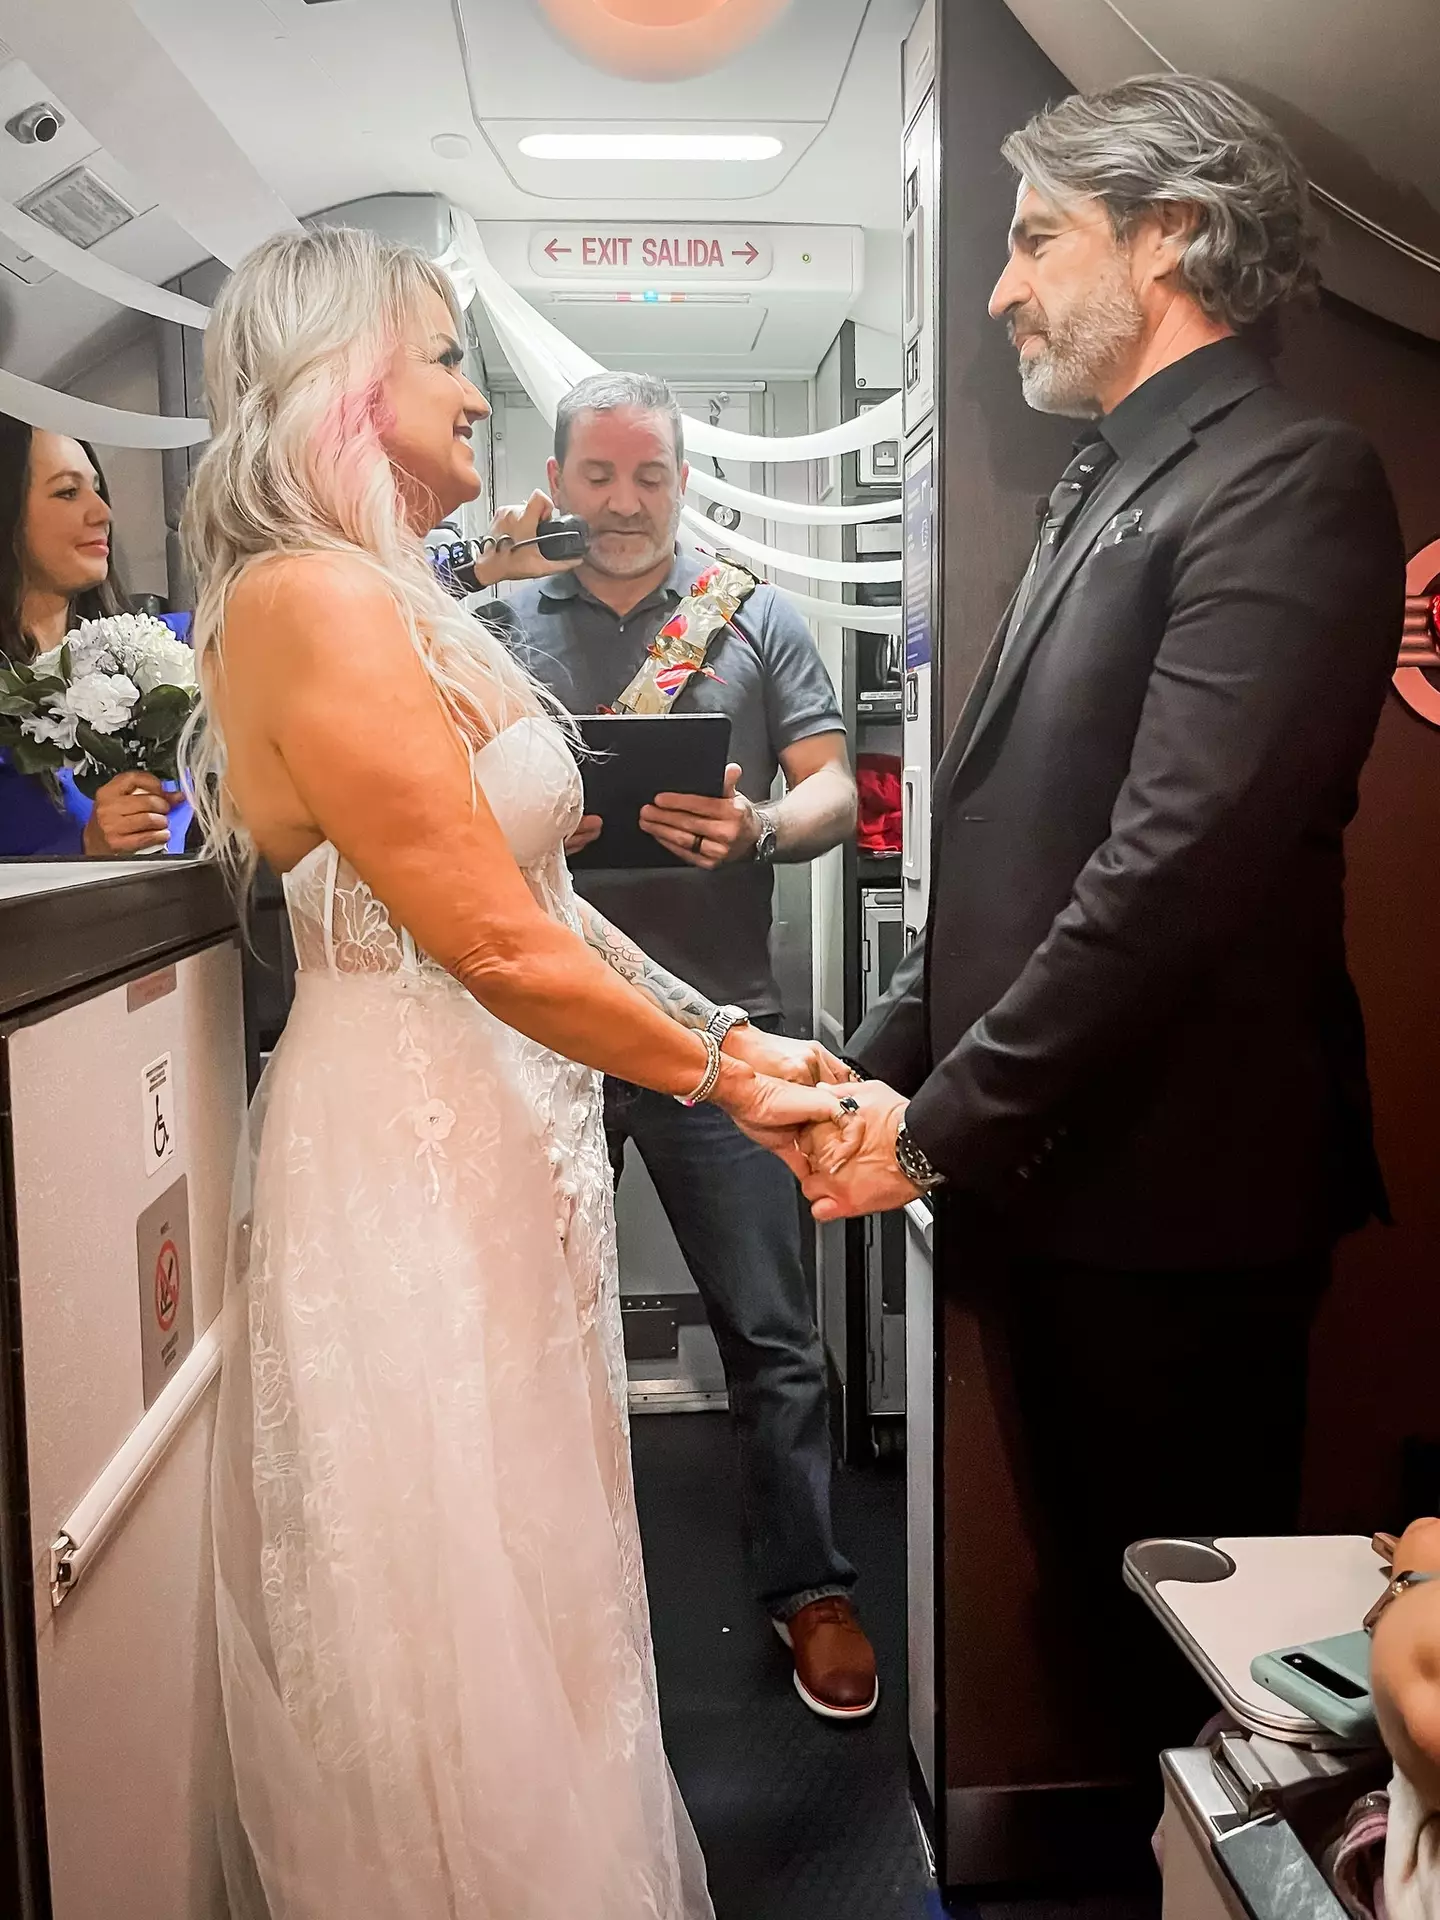 Holidaymakers travelling from Texas to Las Vegas on 24th April 2022 were thrown into an impromptu ceremony when couple Pam Patterson and Jeremy Salda tied the knot onboard Southwest Flight 2690 (Southwest Airlines Facebook).